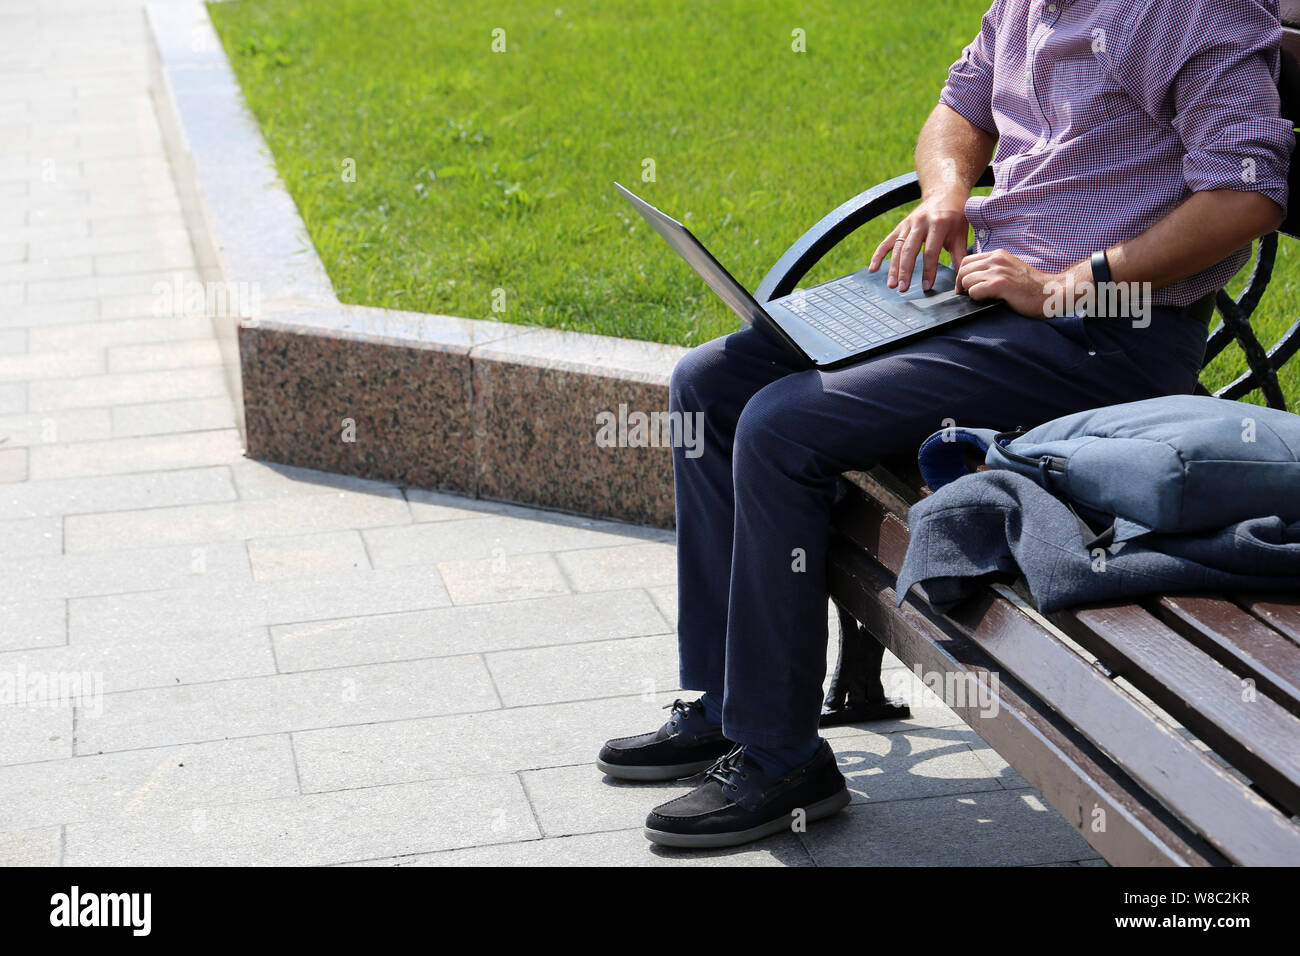 Man sitting with a laptop on a bench in a summer city on green lawn background. Male hands on a keyboard, concept of businessman, working outdoor Stock Photo